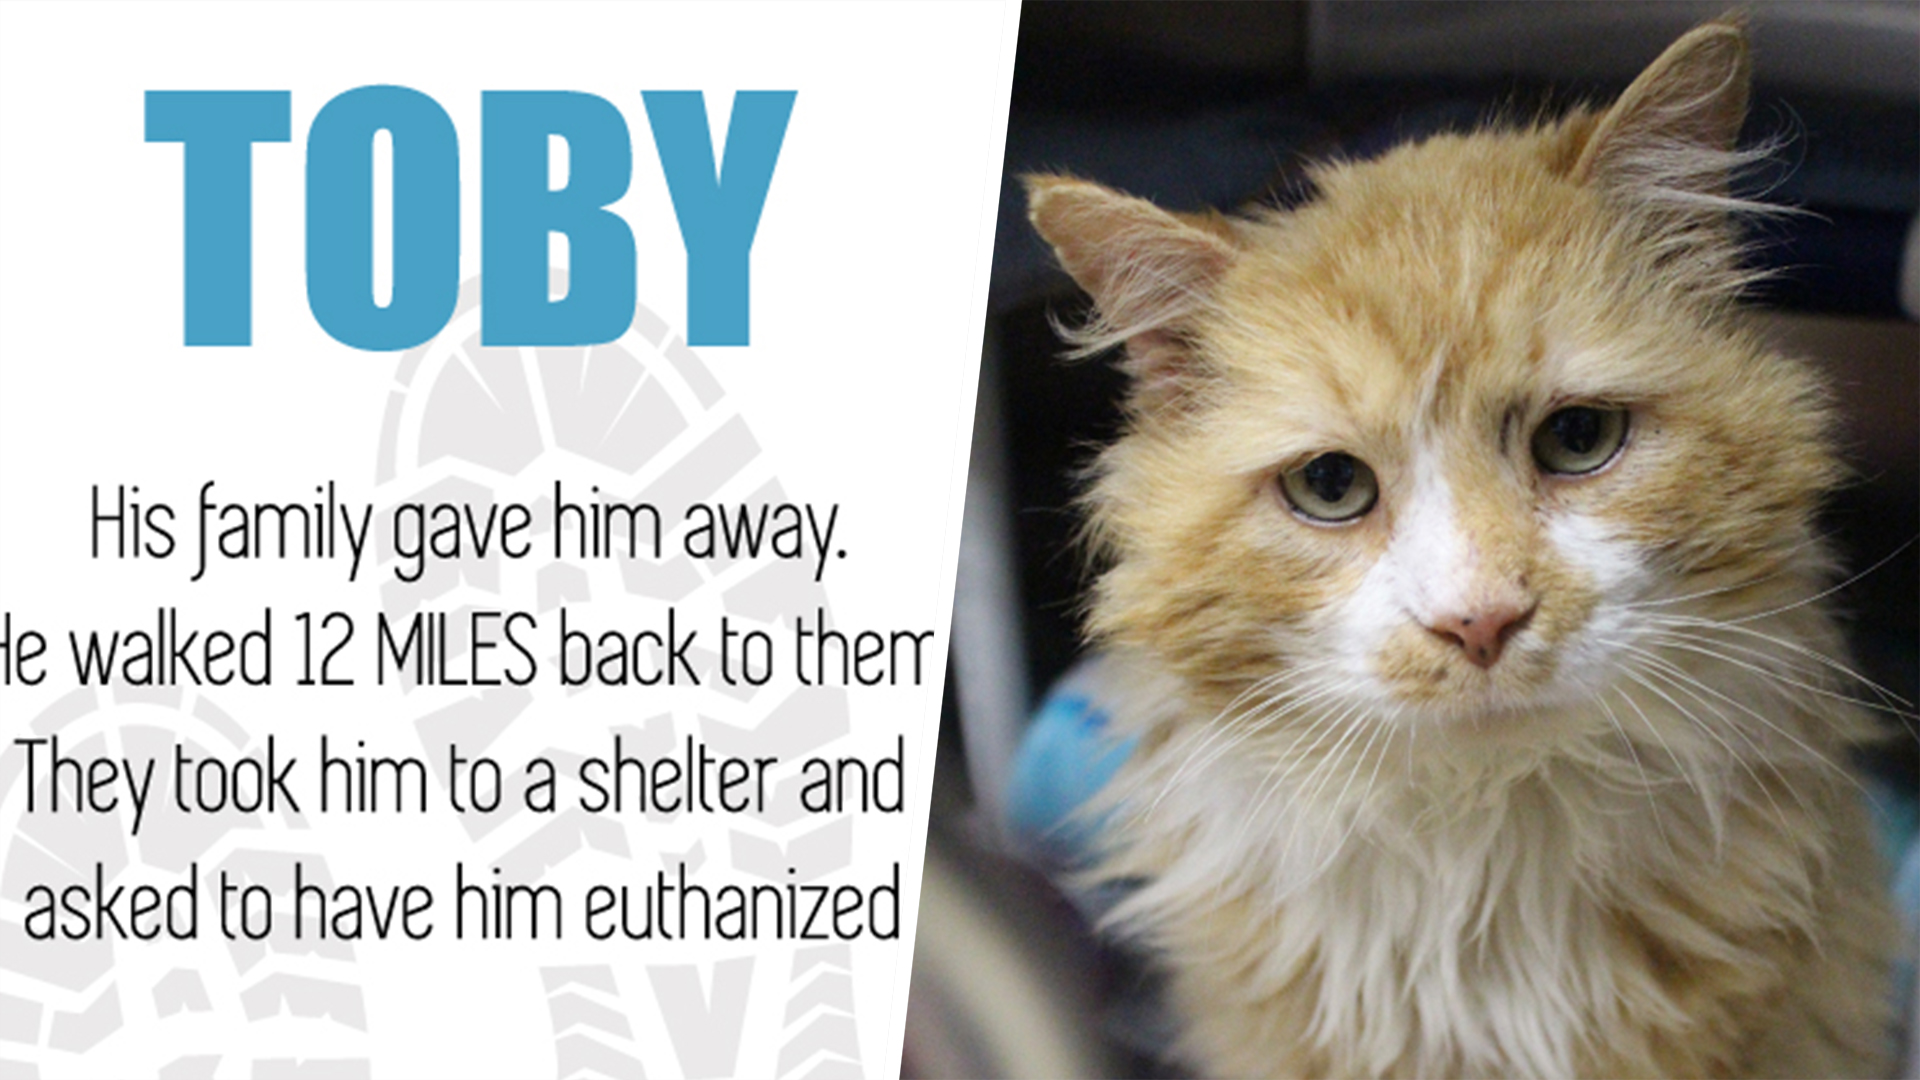 Cat walked 12 miles to get to family who tried to euthanize him